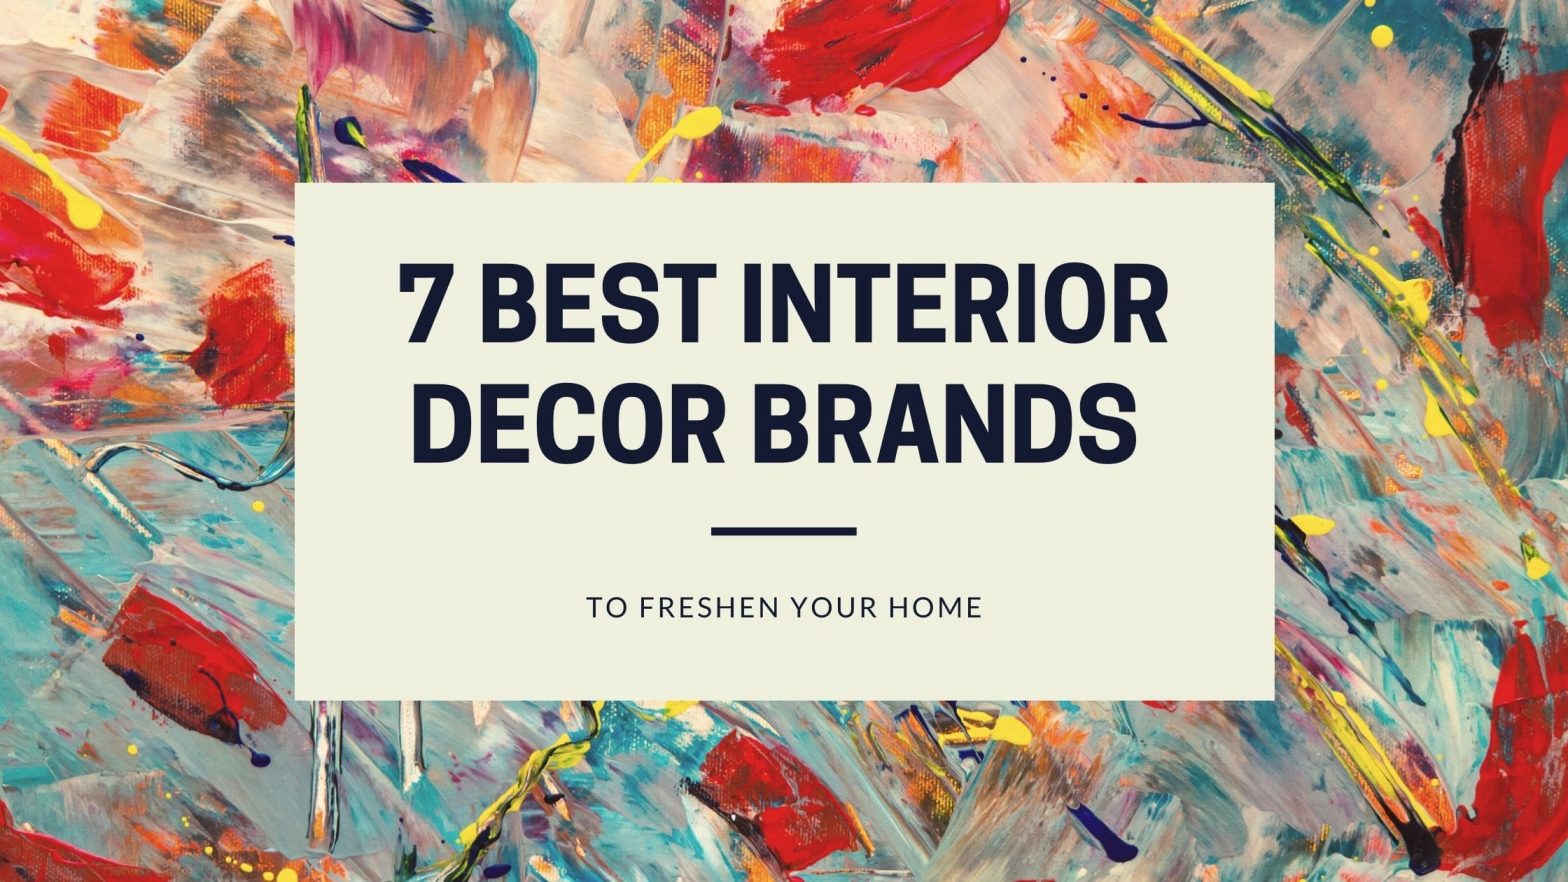 5 Best Interior Decor Brands to Freshen Up Your Home